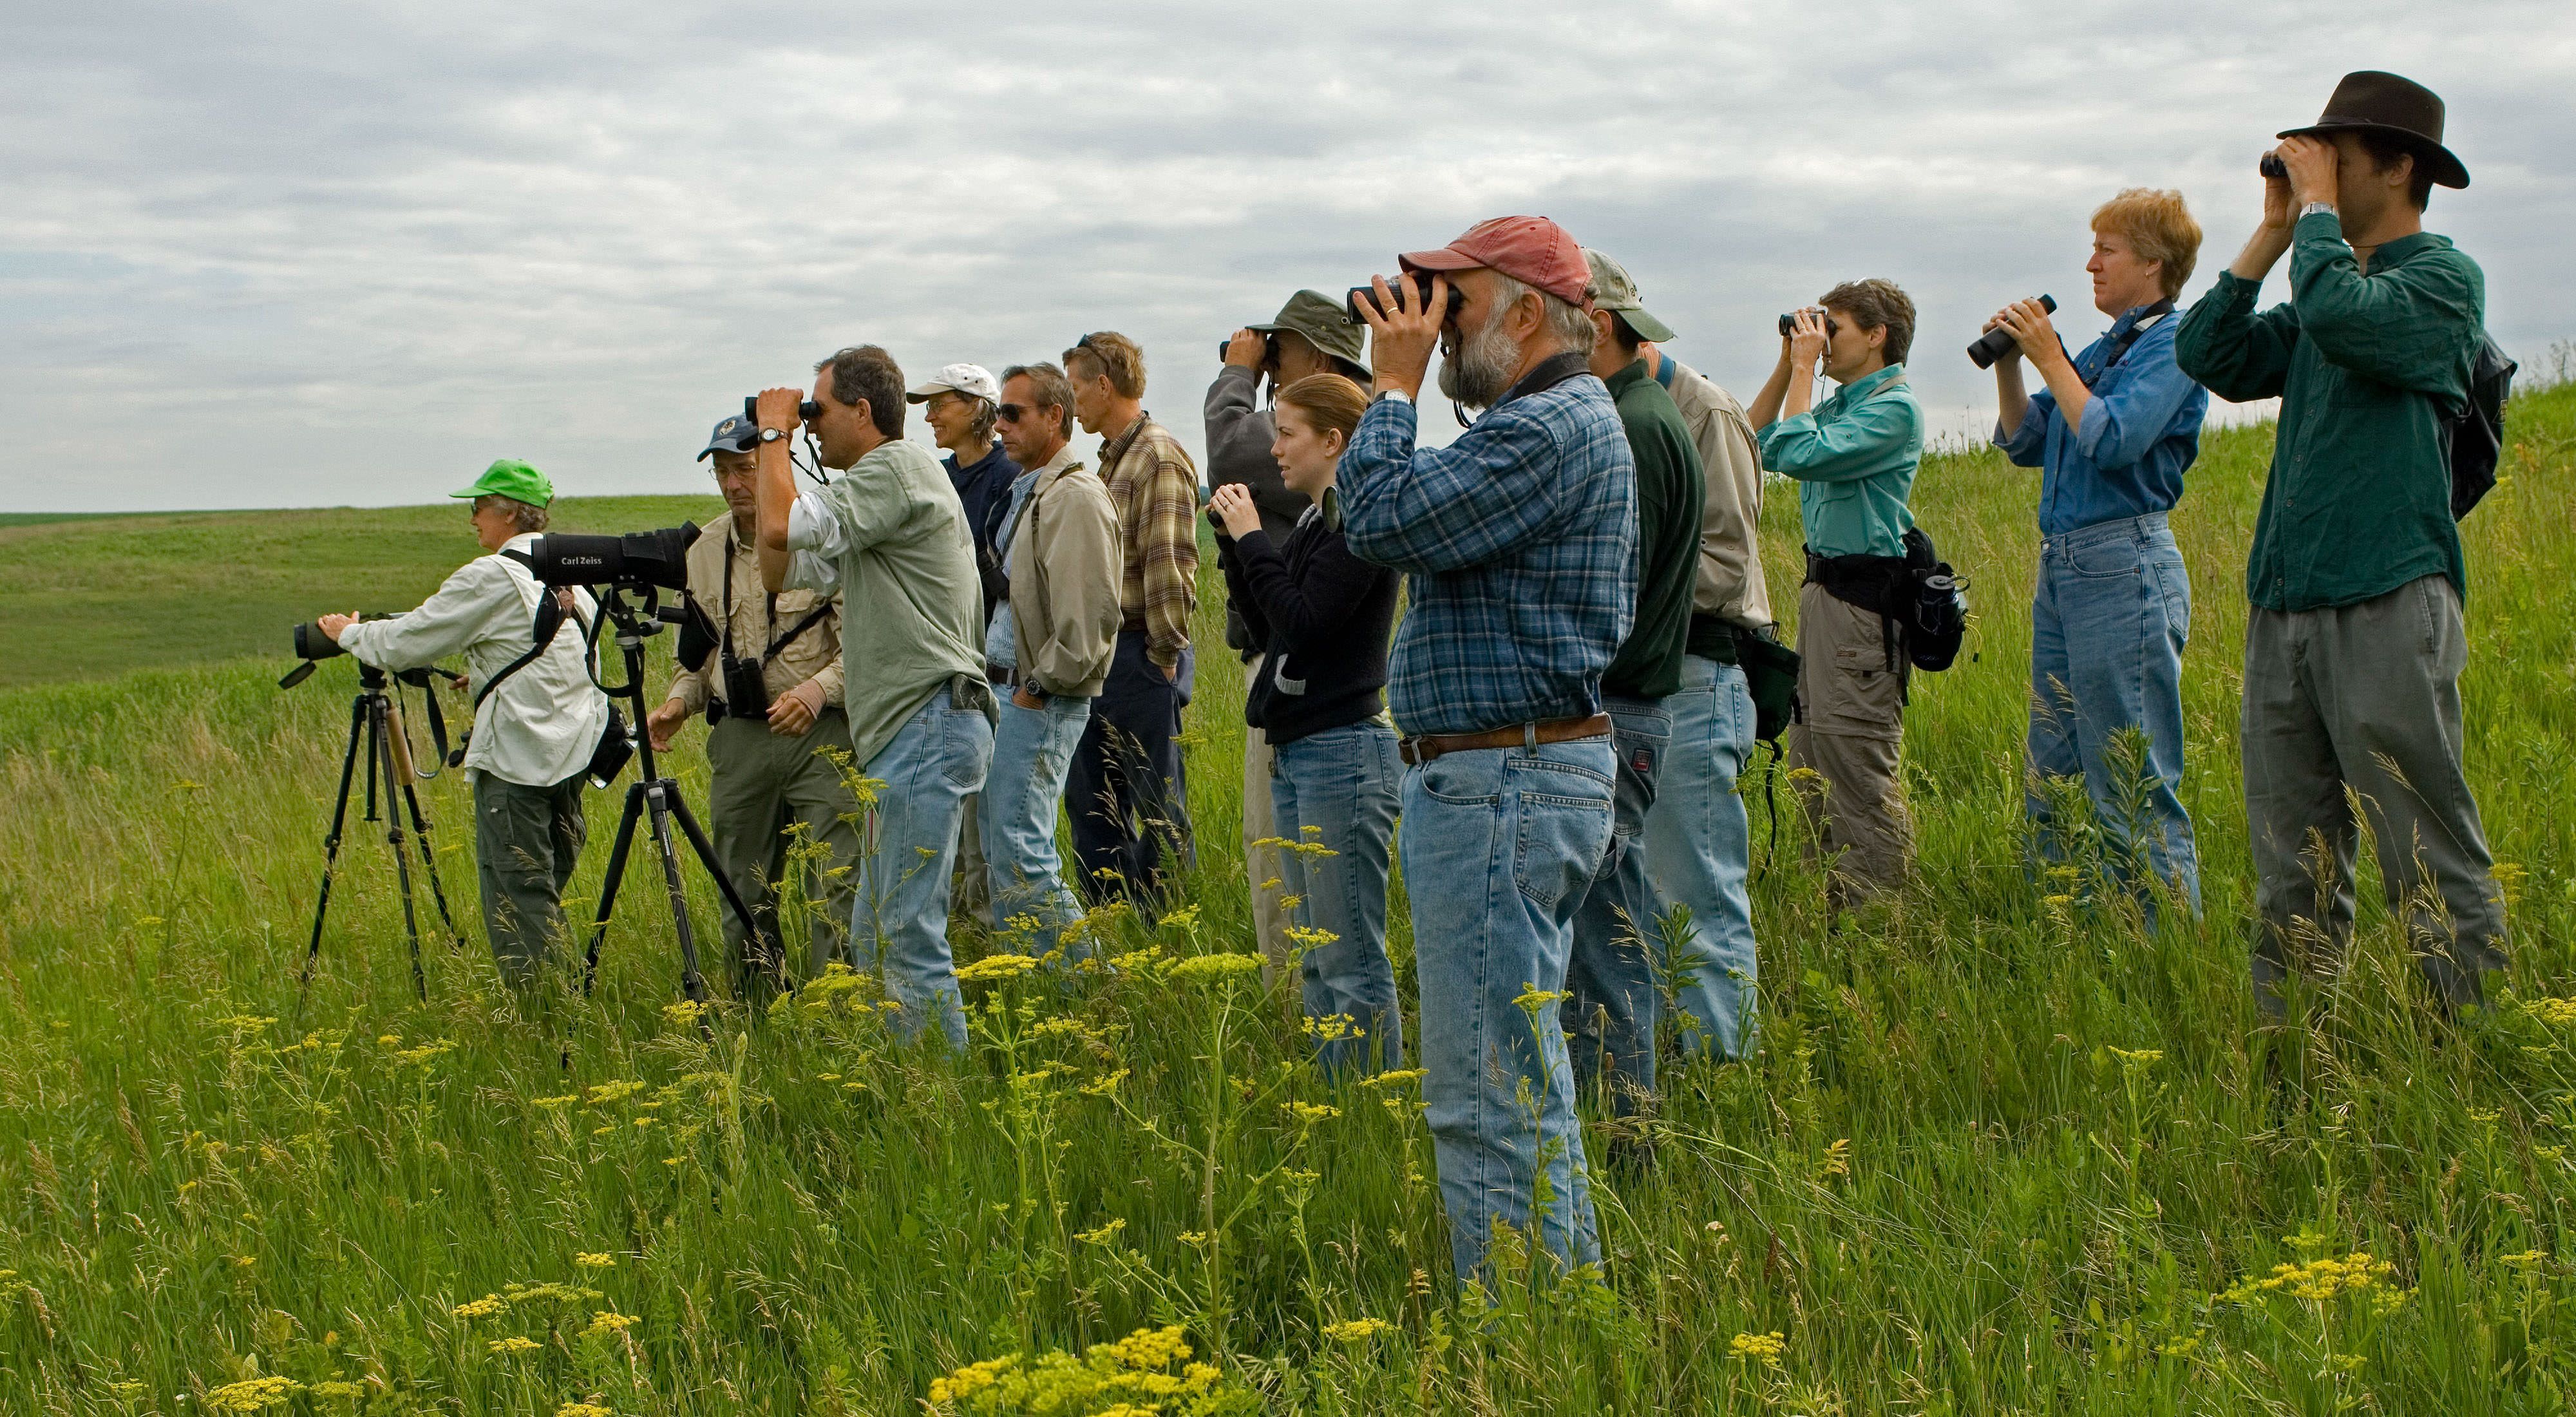 Led by the TNC Wisconsin Chapter Director of Conservation Land Management, Steven Richter, and Wisconsin Grassland Community Ecologist, David W. Sample.